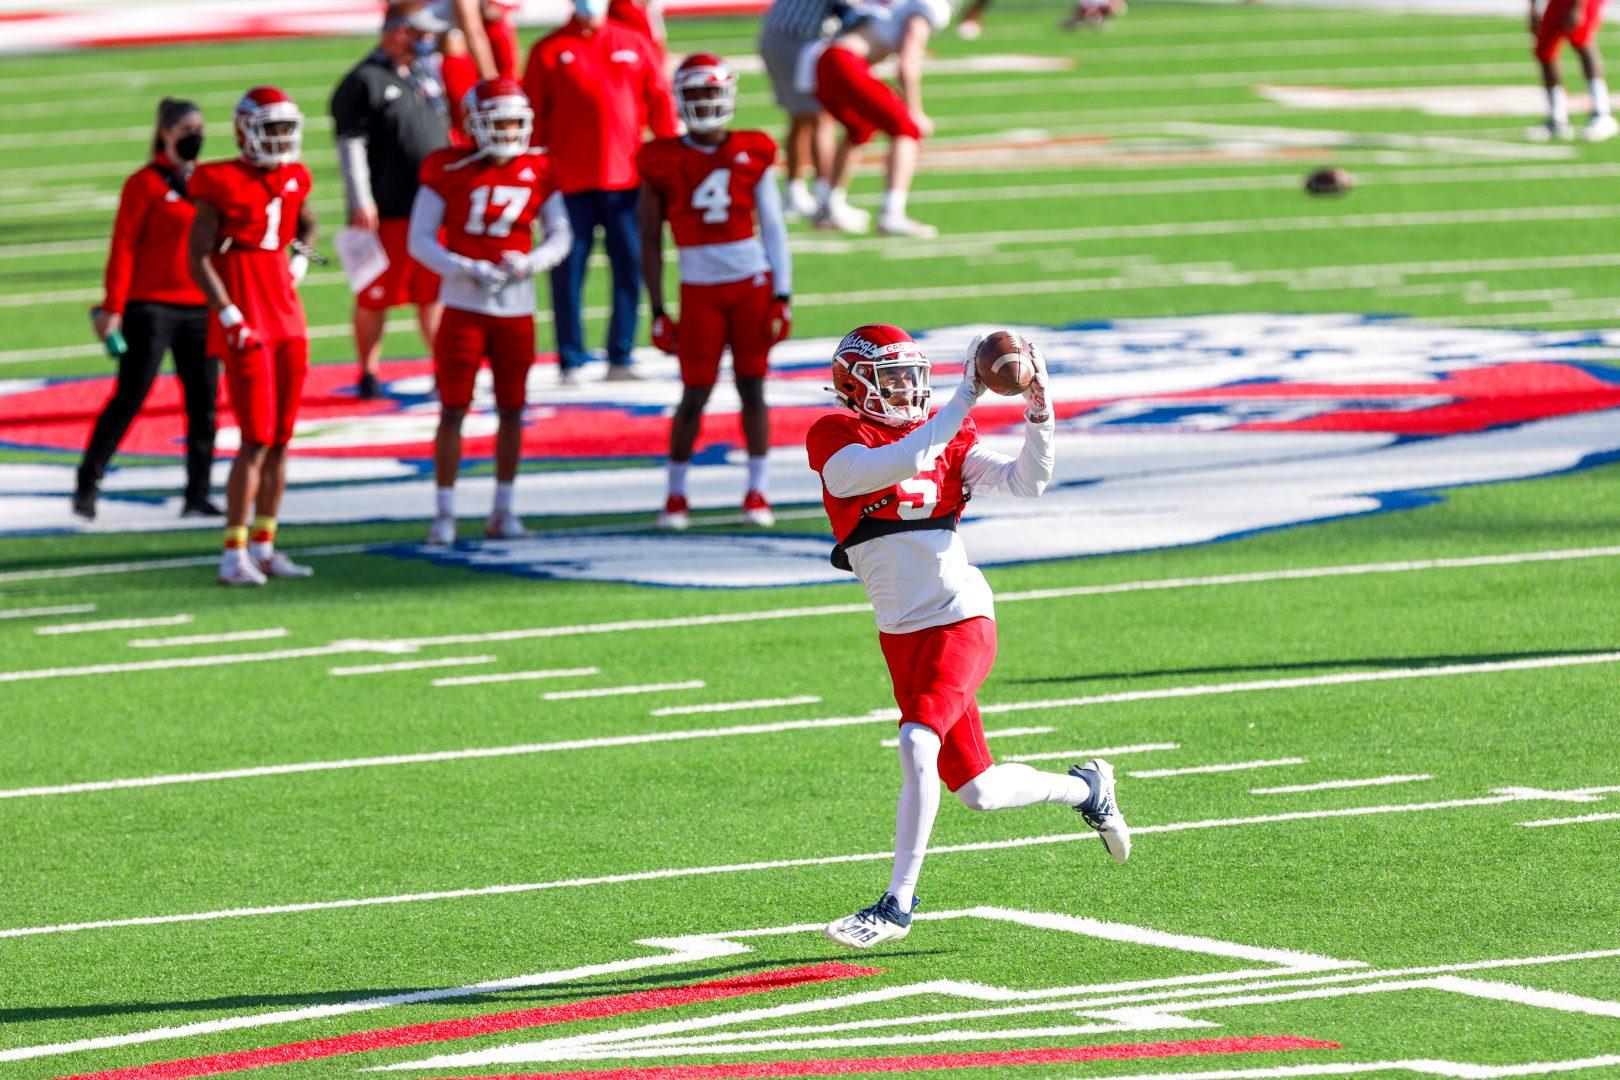 Fresno State wide receiver Jalen Cropper catches the ball during practice No. 4 of their 15 spring practices at Bulldog Stadium on Friday, March 26, 2021. (Vendila Yang/The Collegian)